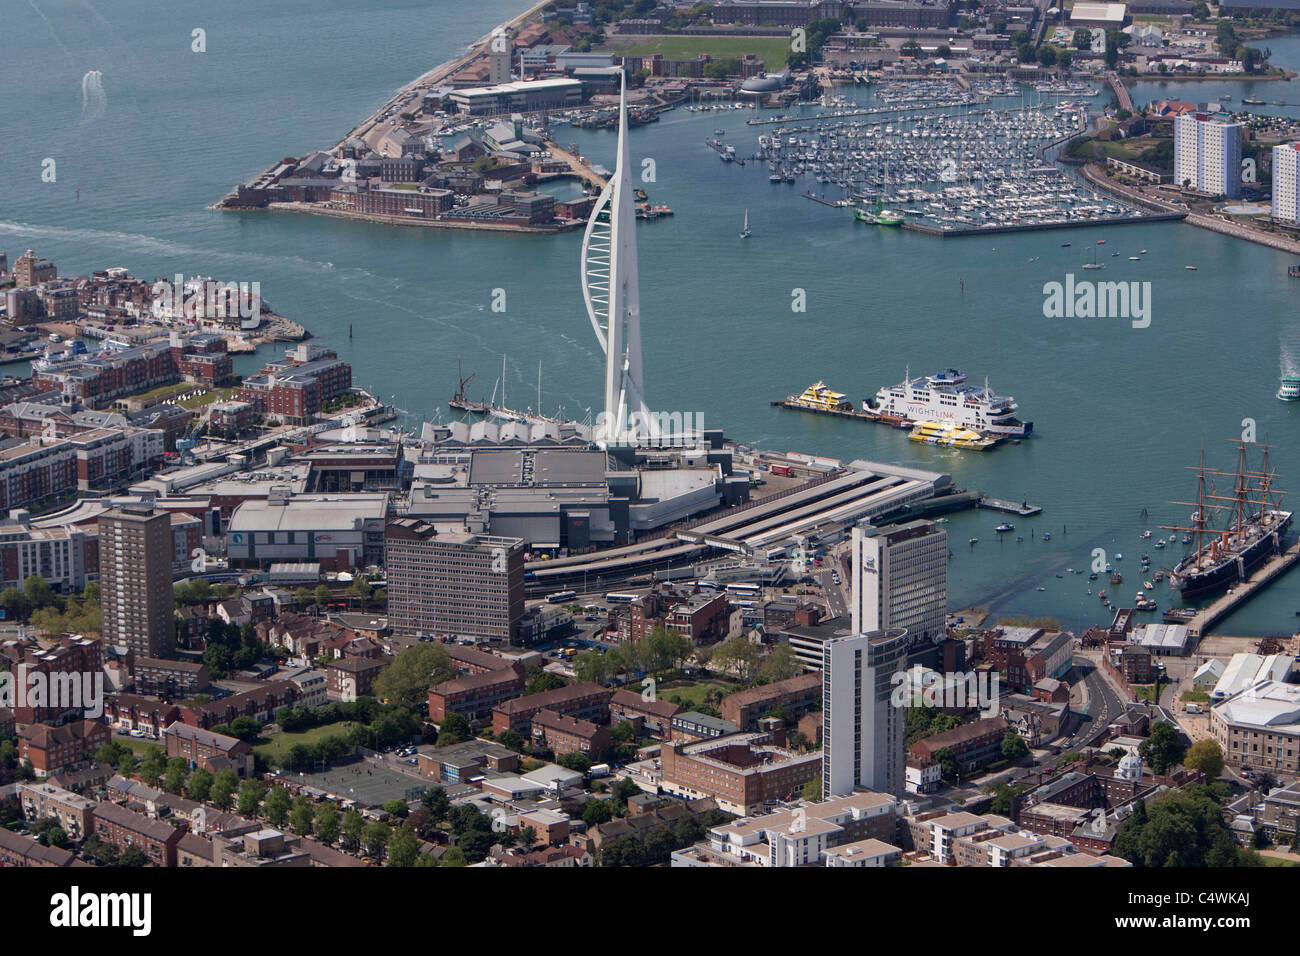 Aerial view of the Spinnaker Tower in Portsmouth Harbour. Picture by James Boardman. Stock Photo